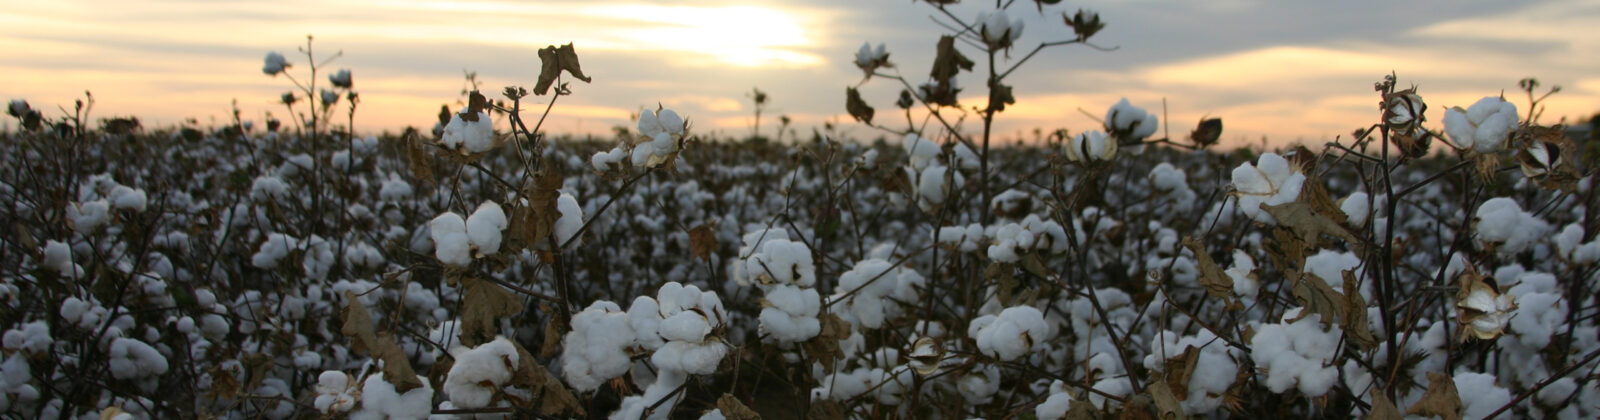 Cotton in the Evening